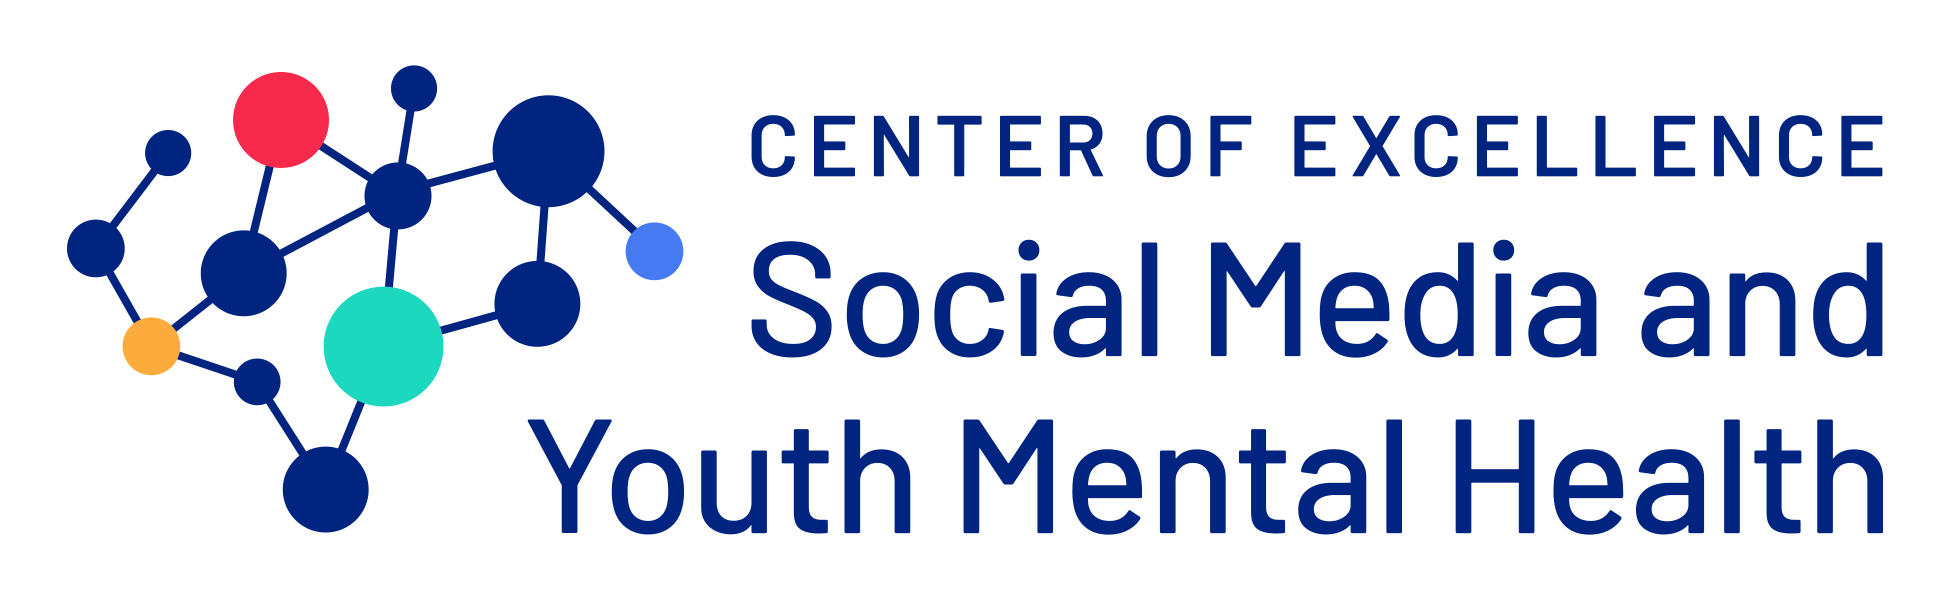 Center of Excellence on Social Media and Youth Mental Health